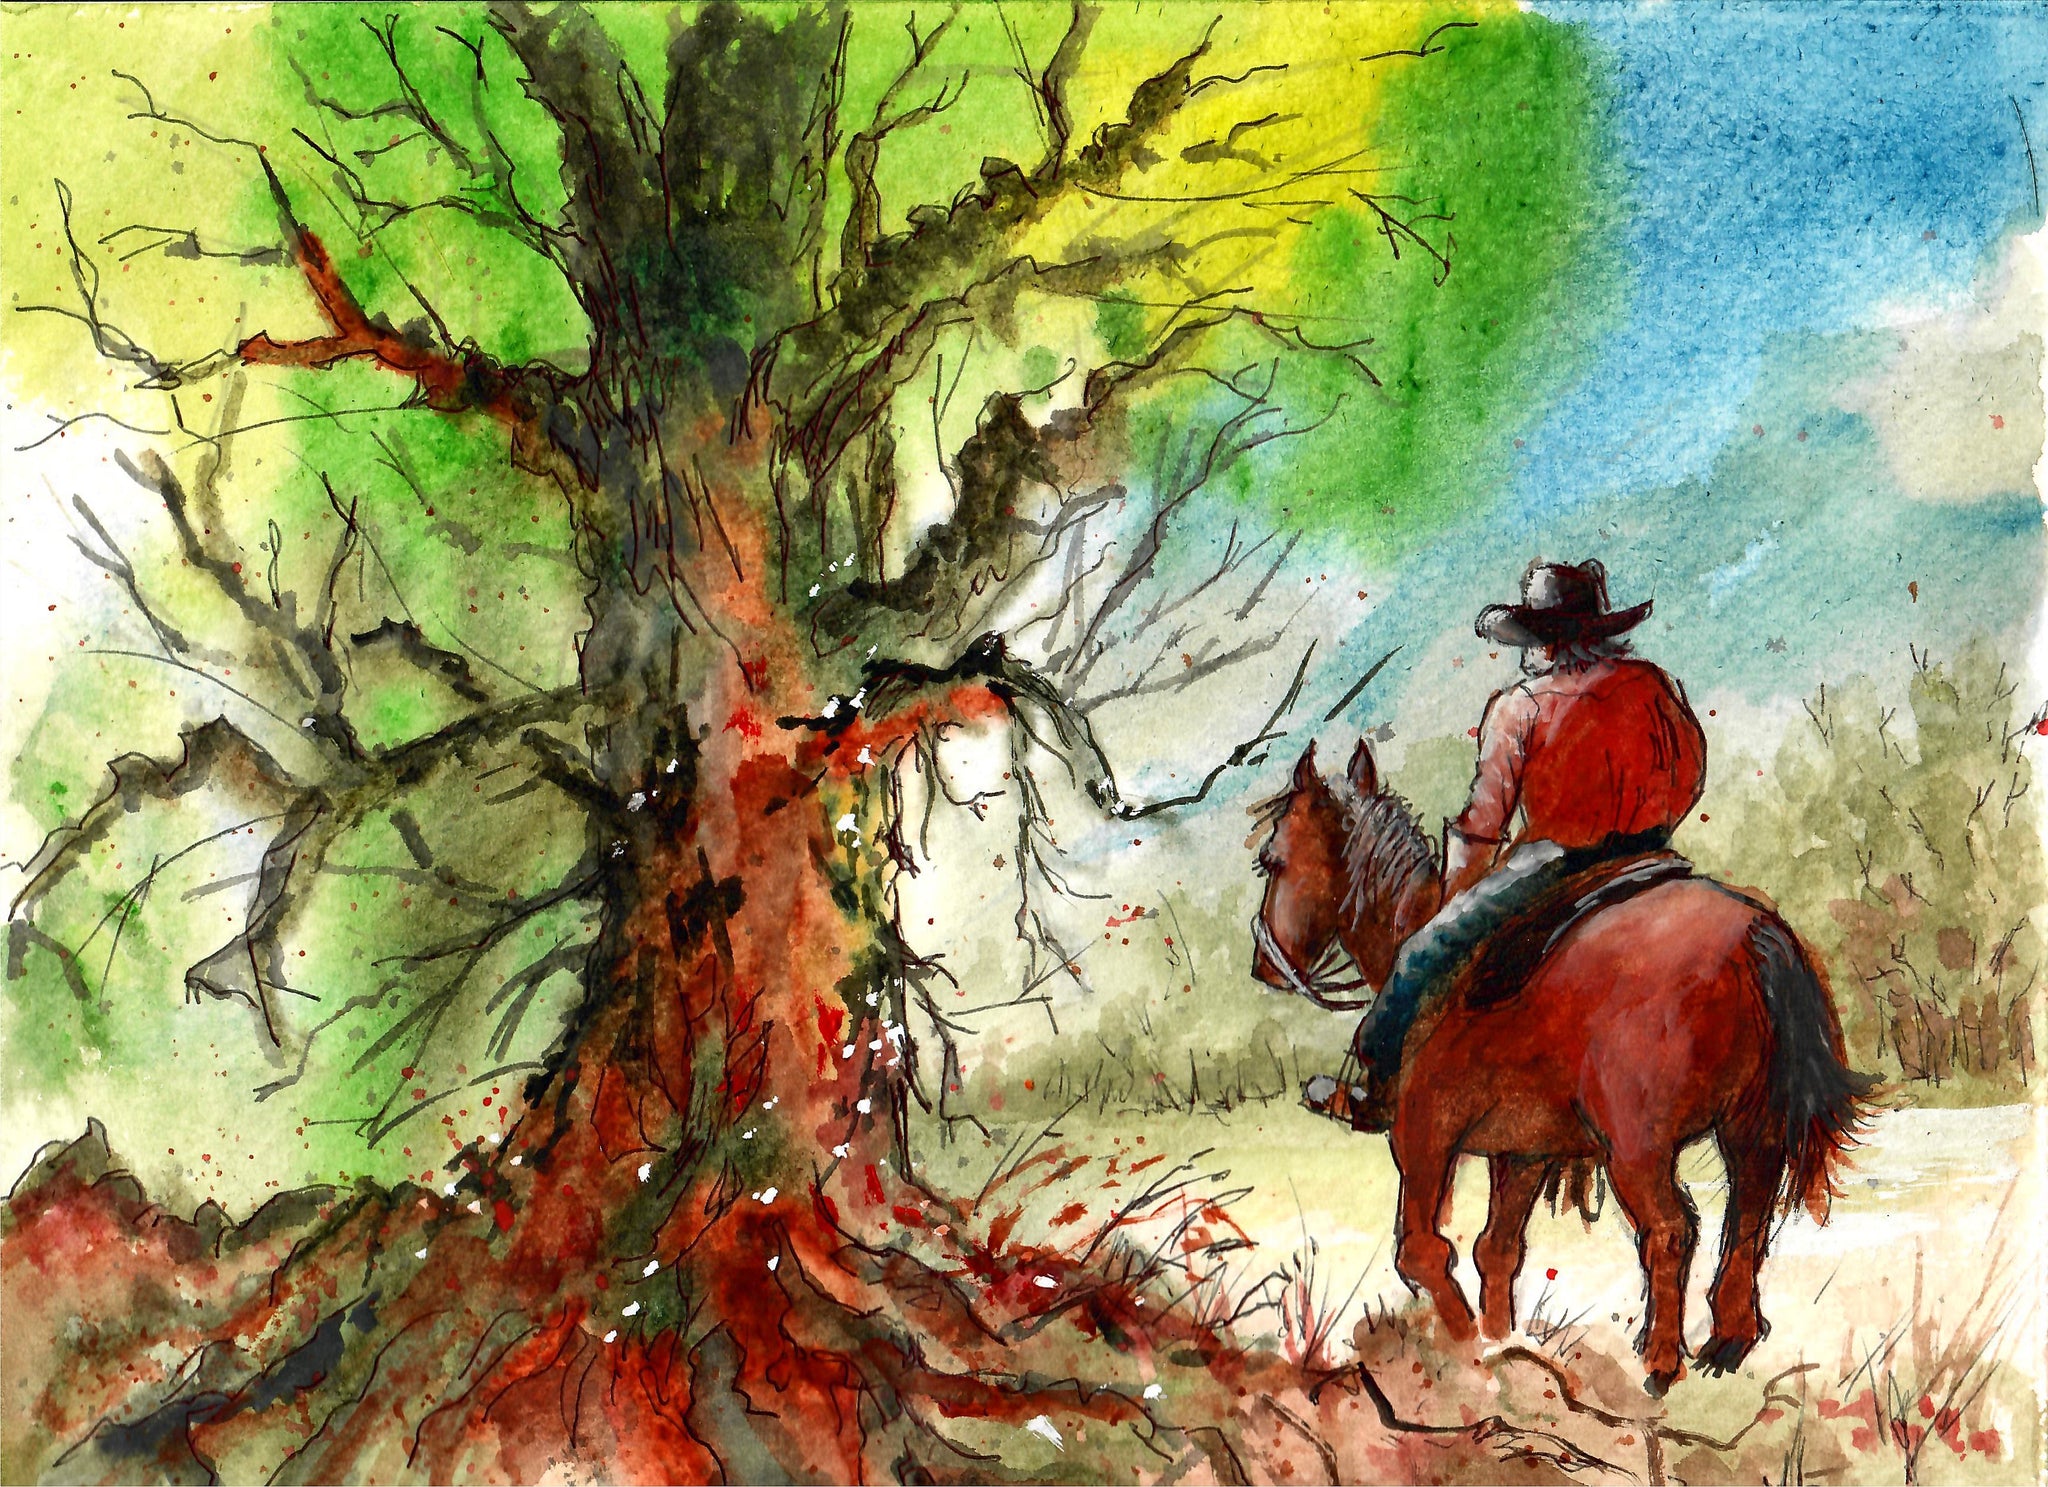 Western - Cowboy Riding Past Old Tree, Cowboy And Horse In The Country